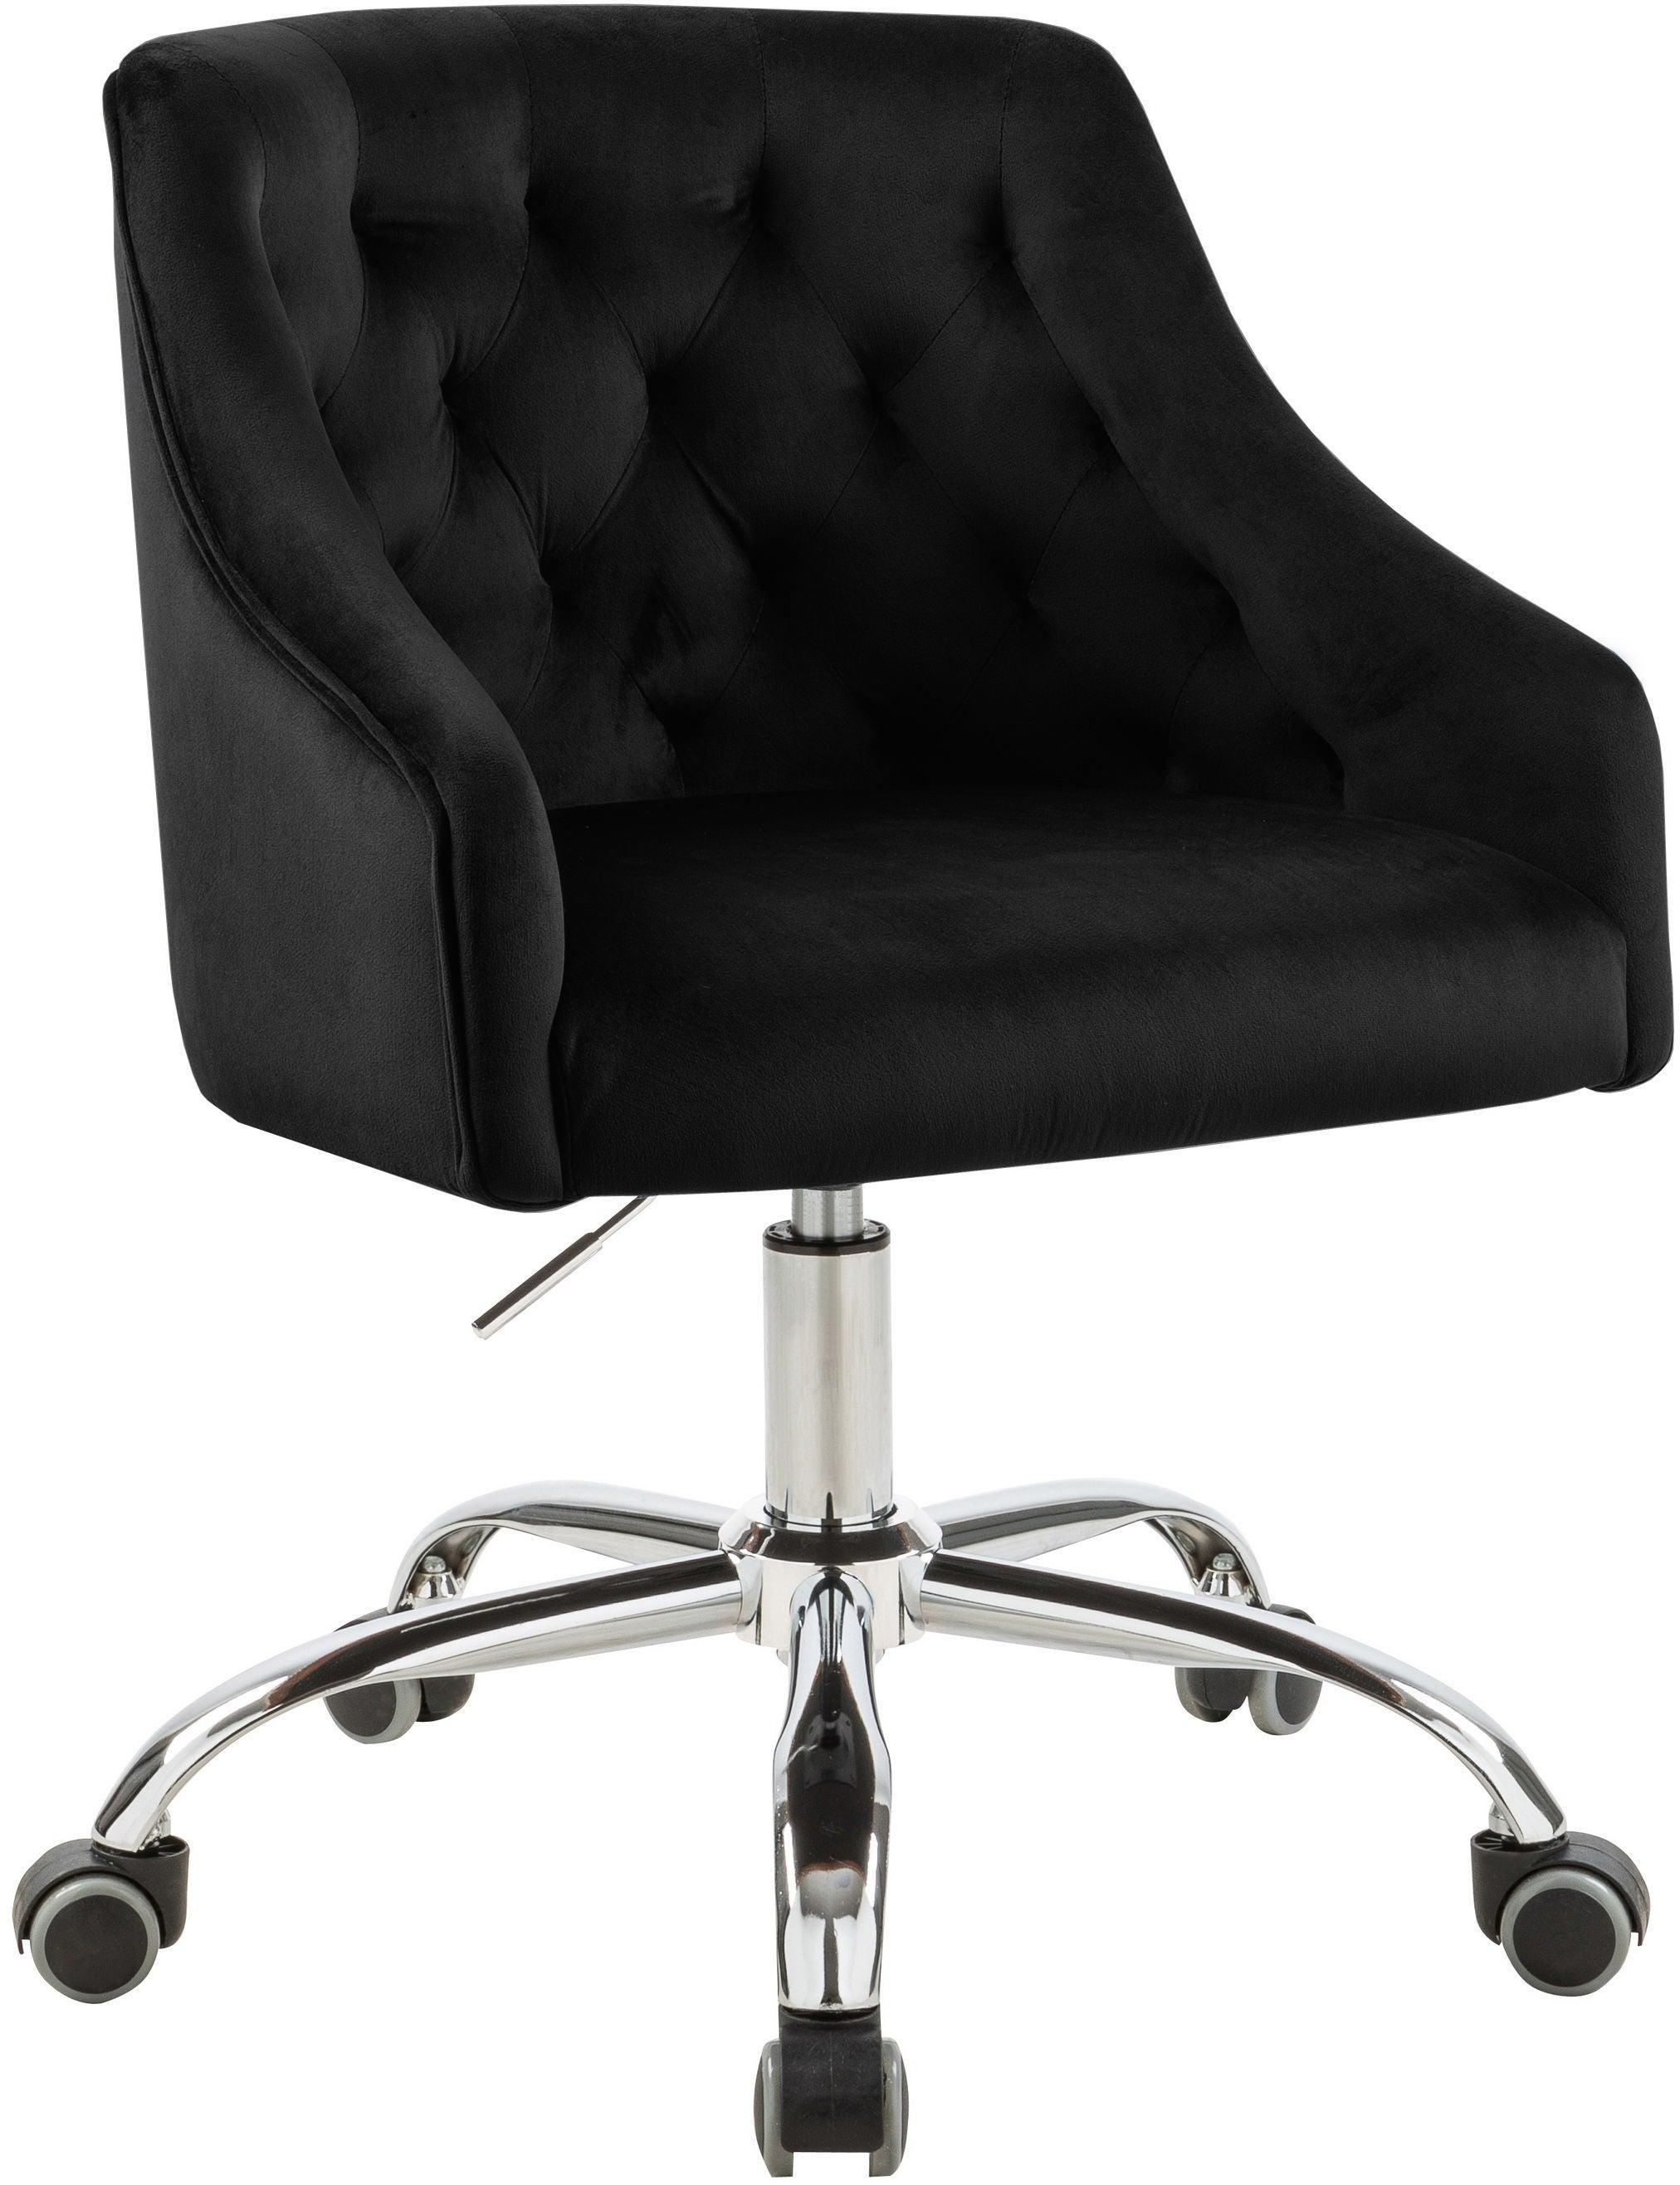 Meridian Furniture - Arden - Office Chair - 5th Avenue Furniture